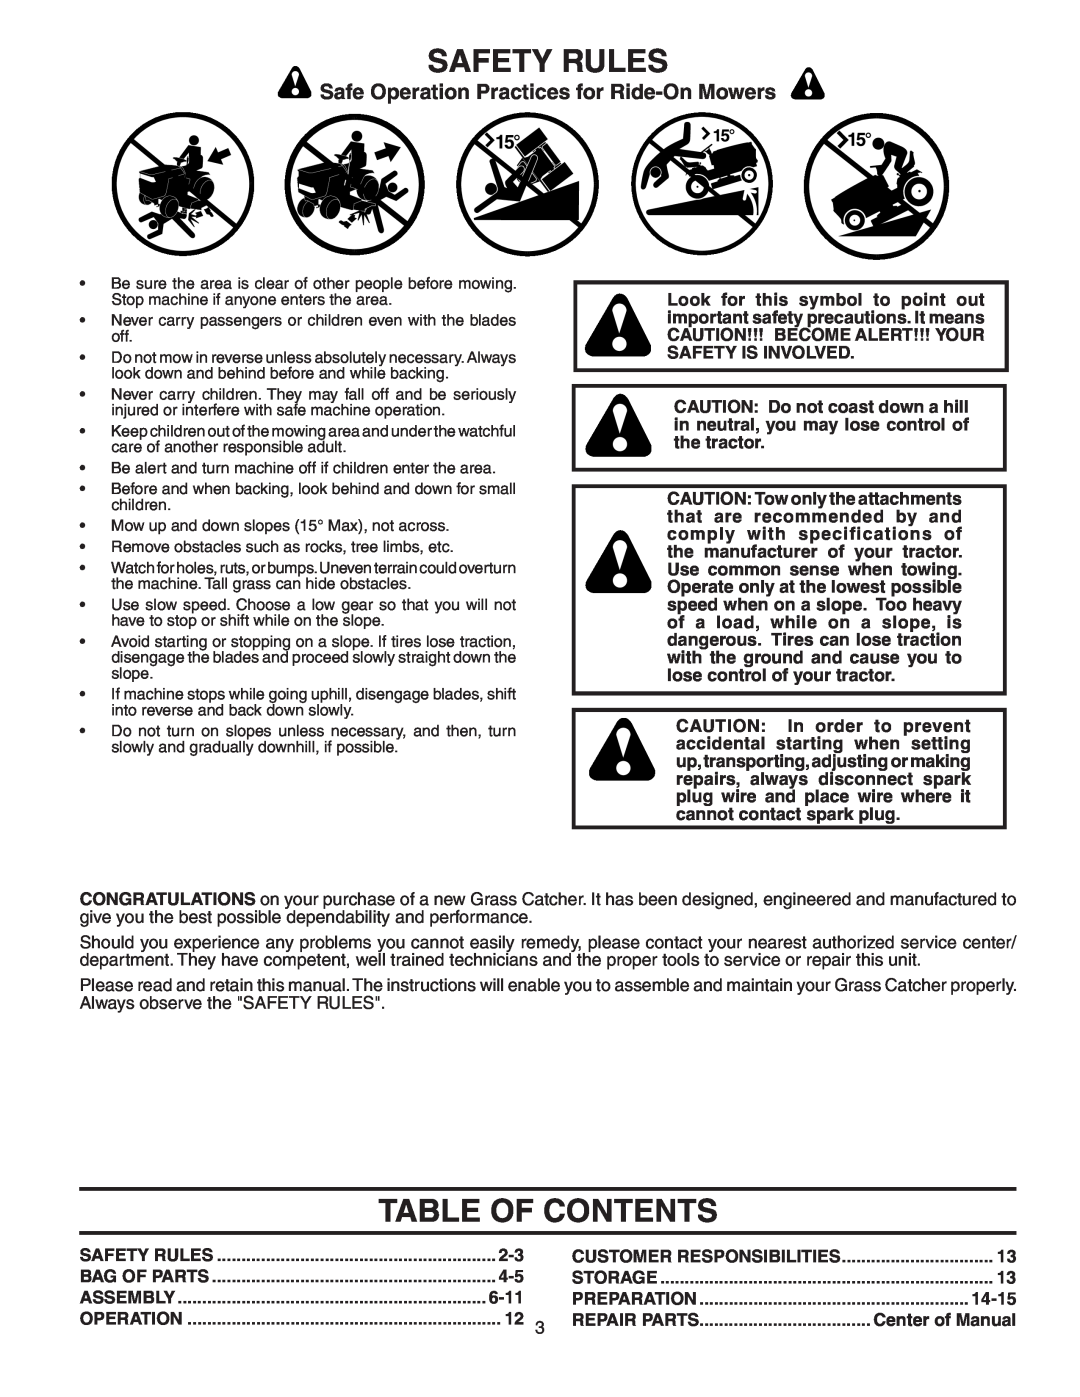 Poulan CL46B, 954 04 06-06, 156239 owner manual Table Of Contents, Safety Rules, Safe Operation Practices for Ride-On Mowers 